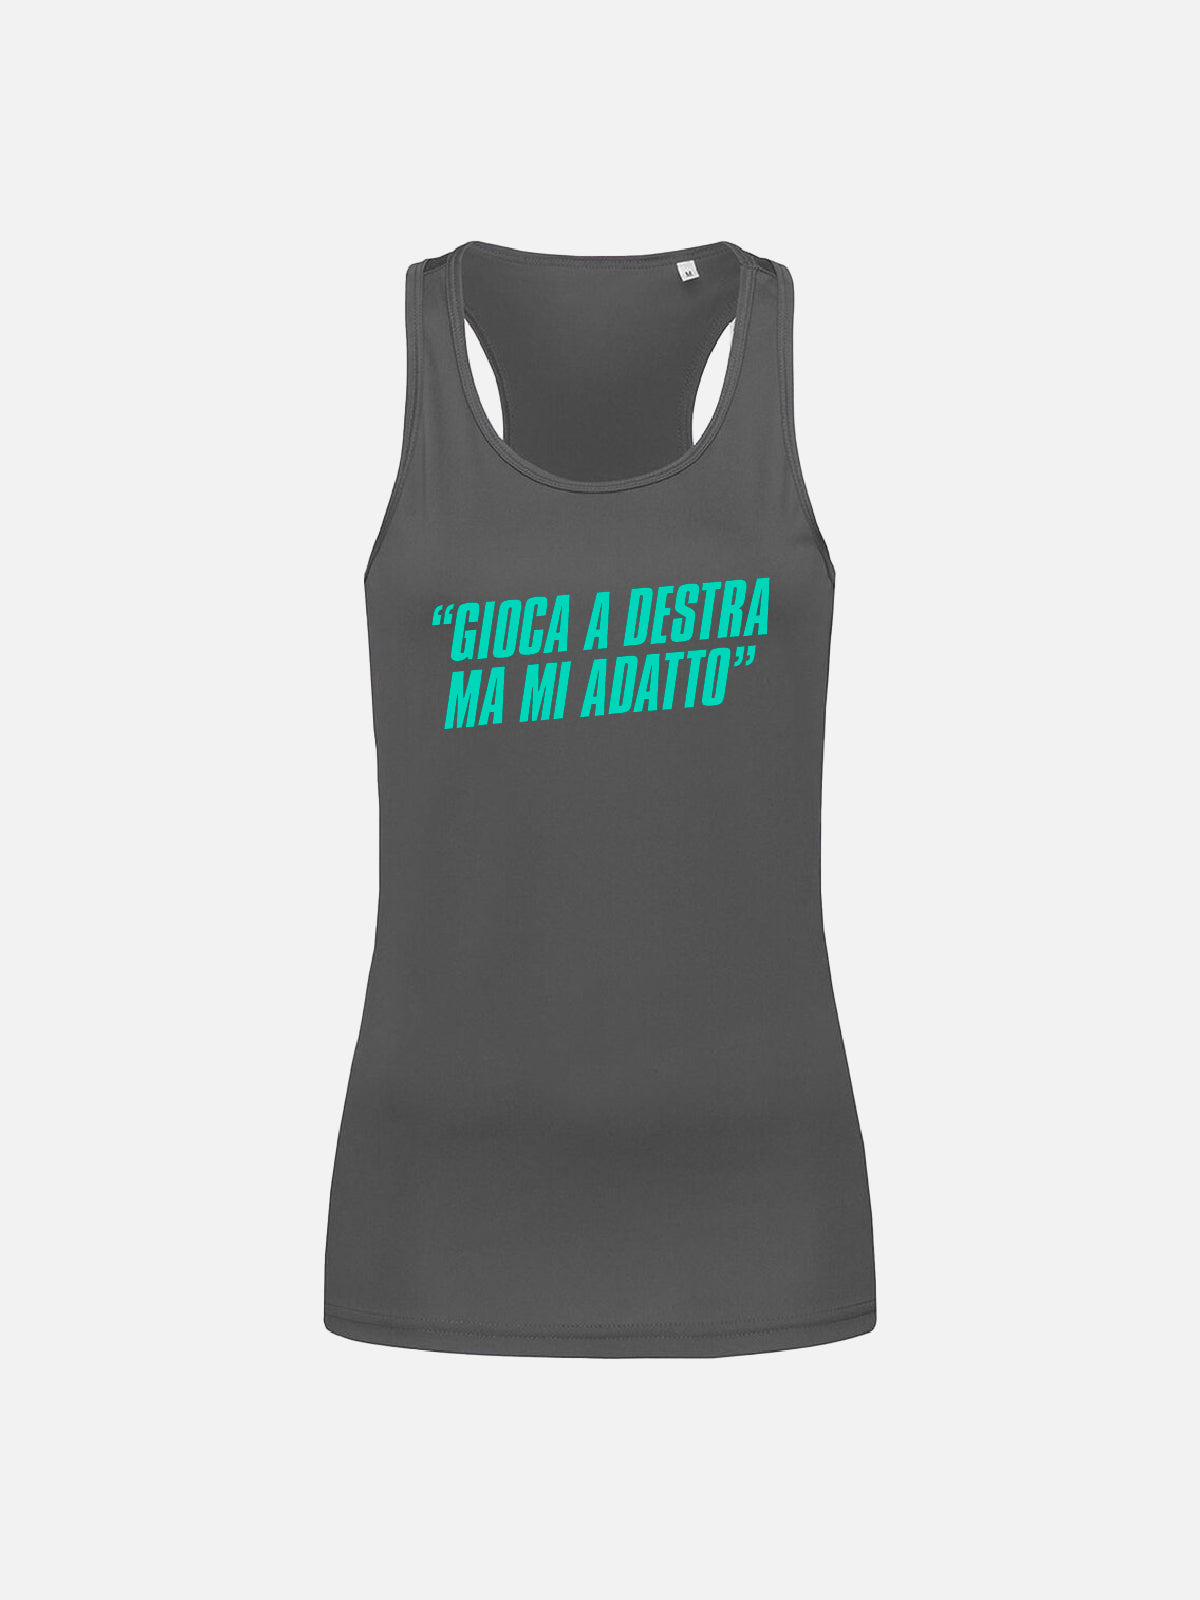 Tank top - “I play on the right but I adapt"